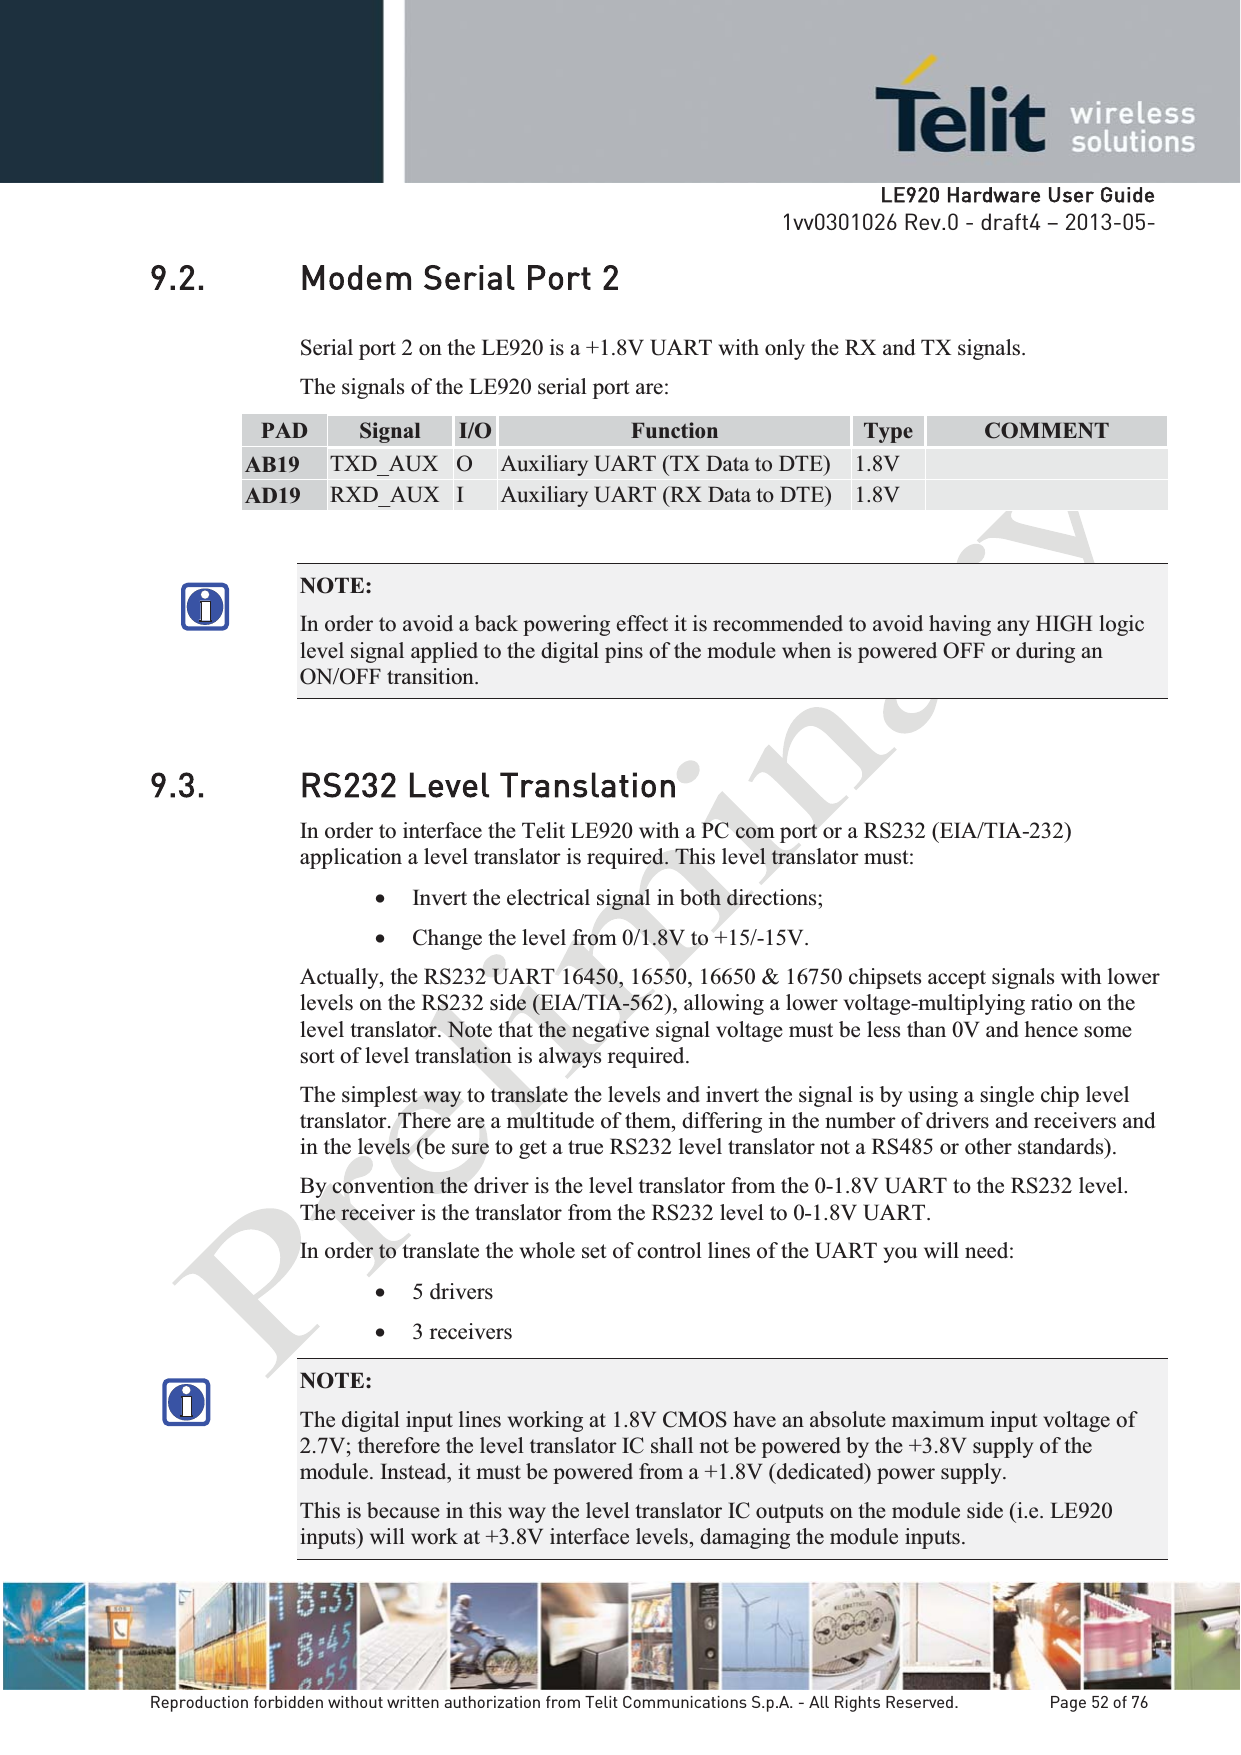   LLE920 Hardware User Guide1vv0301026 Rev.0 - draft4 – 2013-05-Reproduction forbidden without written authorization from Telit Communications S.p.A. - All Rights Reserved.    Page 52 of 76 9.2. Modem Serial Port 2 Serial port 2 on the LE920 is a +1.8V UART with only the RX and TX signals.  The signals of the LE920 serial port are: PAD  Signal  I/O  Function Type  COMMENT AB19  TXD_AUX  O  Auxiliary UART (TX Data to DTE)  1.8V   AD19  RXD_AUX  I  Auxiliary UART (RX Data to DTE)  1.8V   NOTE:  In order to avoid a back powering effect it is recommended to avoid having any HIGH logic level signal applied to the digital pins of the module when is powered OFF or during an ON/OFF transition. 9.3. RS232 Level Translation In order to interface the Telit LE920 with a PC com port or a RS232 (EIA/TIA-232) application a level translator is required. This level translator must: x Invert the electrical signal in both directions; x Change the level from 0/1.8V to +15/-15V. Actually, the RS232 UART 16450, 16550, 16650 &amp; 16750 chipsets accept signals with lower levels on the RS232 side (EIA/TIA-562), allowing a lower voltage-multiplying ratio on the level translator. Note that the negative signal voltage must be less than 0V and hence some sort of level translation is always required.  The simplest way to translate the levels and invert the signal is by using a single chip level translator. There are a multitude of them, differing in the number of drivers and receivers and in the levels (be sure to get a true RS232 level translator not a RS485 or other standards). By convention the driver is the level translator from the 0-1.8V UART to the RS232 level. The receiver is the translator from the RS232 level to 0-1.8V UART. In order to translate the whole set of control lines of the UART you will need: x 5 drivers x 3 receivers NOTE:  The digital input lines working at 1.8V CMOS have an absolute maximum input voltage of 2.7V; therefore the level translator IC shall not be powered by the +3.8V supply of the module. Instead, it must be powered from a +1.8V (dedicated) power supply. This is because in this way the level translator IC outputs on the module side (i.e. LE920 inputs) will work at +3.8V interface levels, damaging the module inputs. 